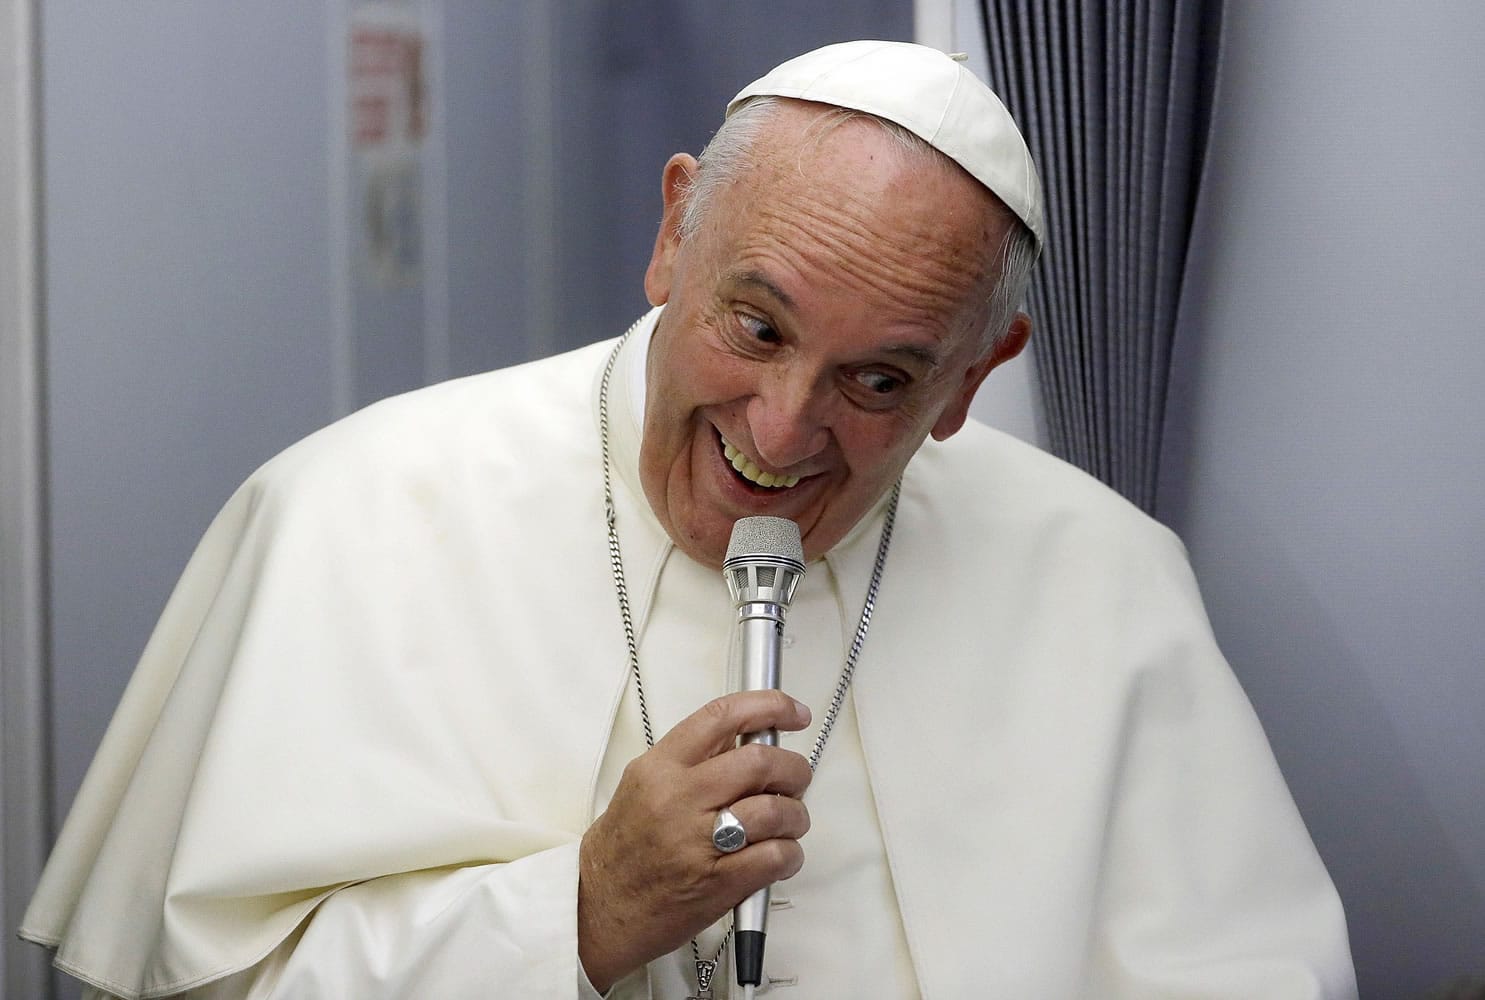 Pope Francis smiles as he meets the media during an airborne press conference aboard the airplane directed to Rome, at the end of his Apostolic journey in Ecuador, Bolivia and Paraguay.